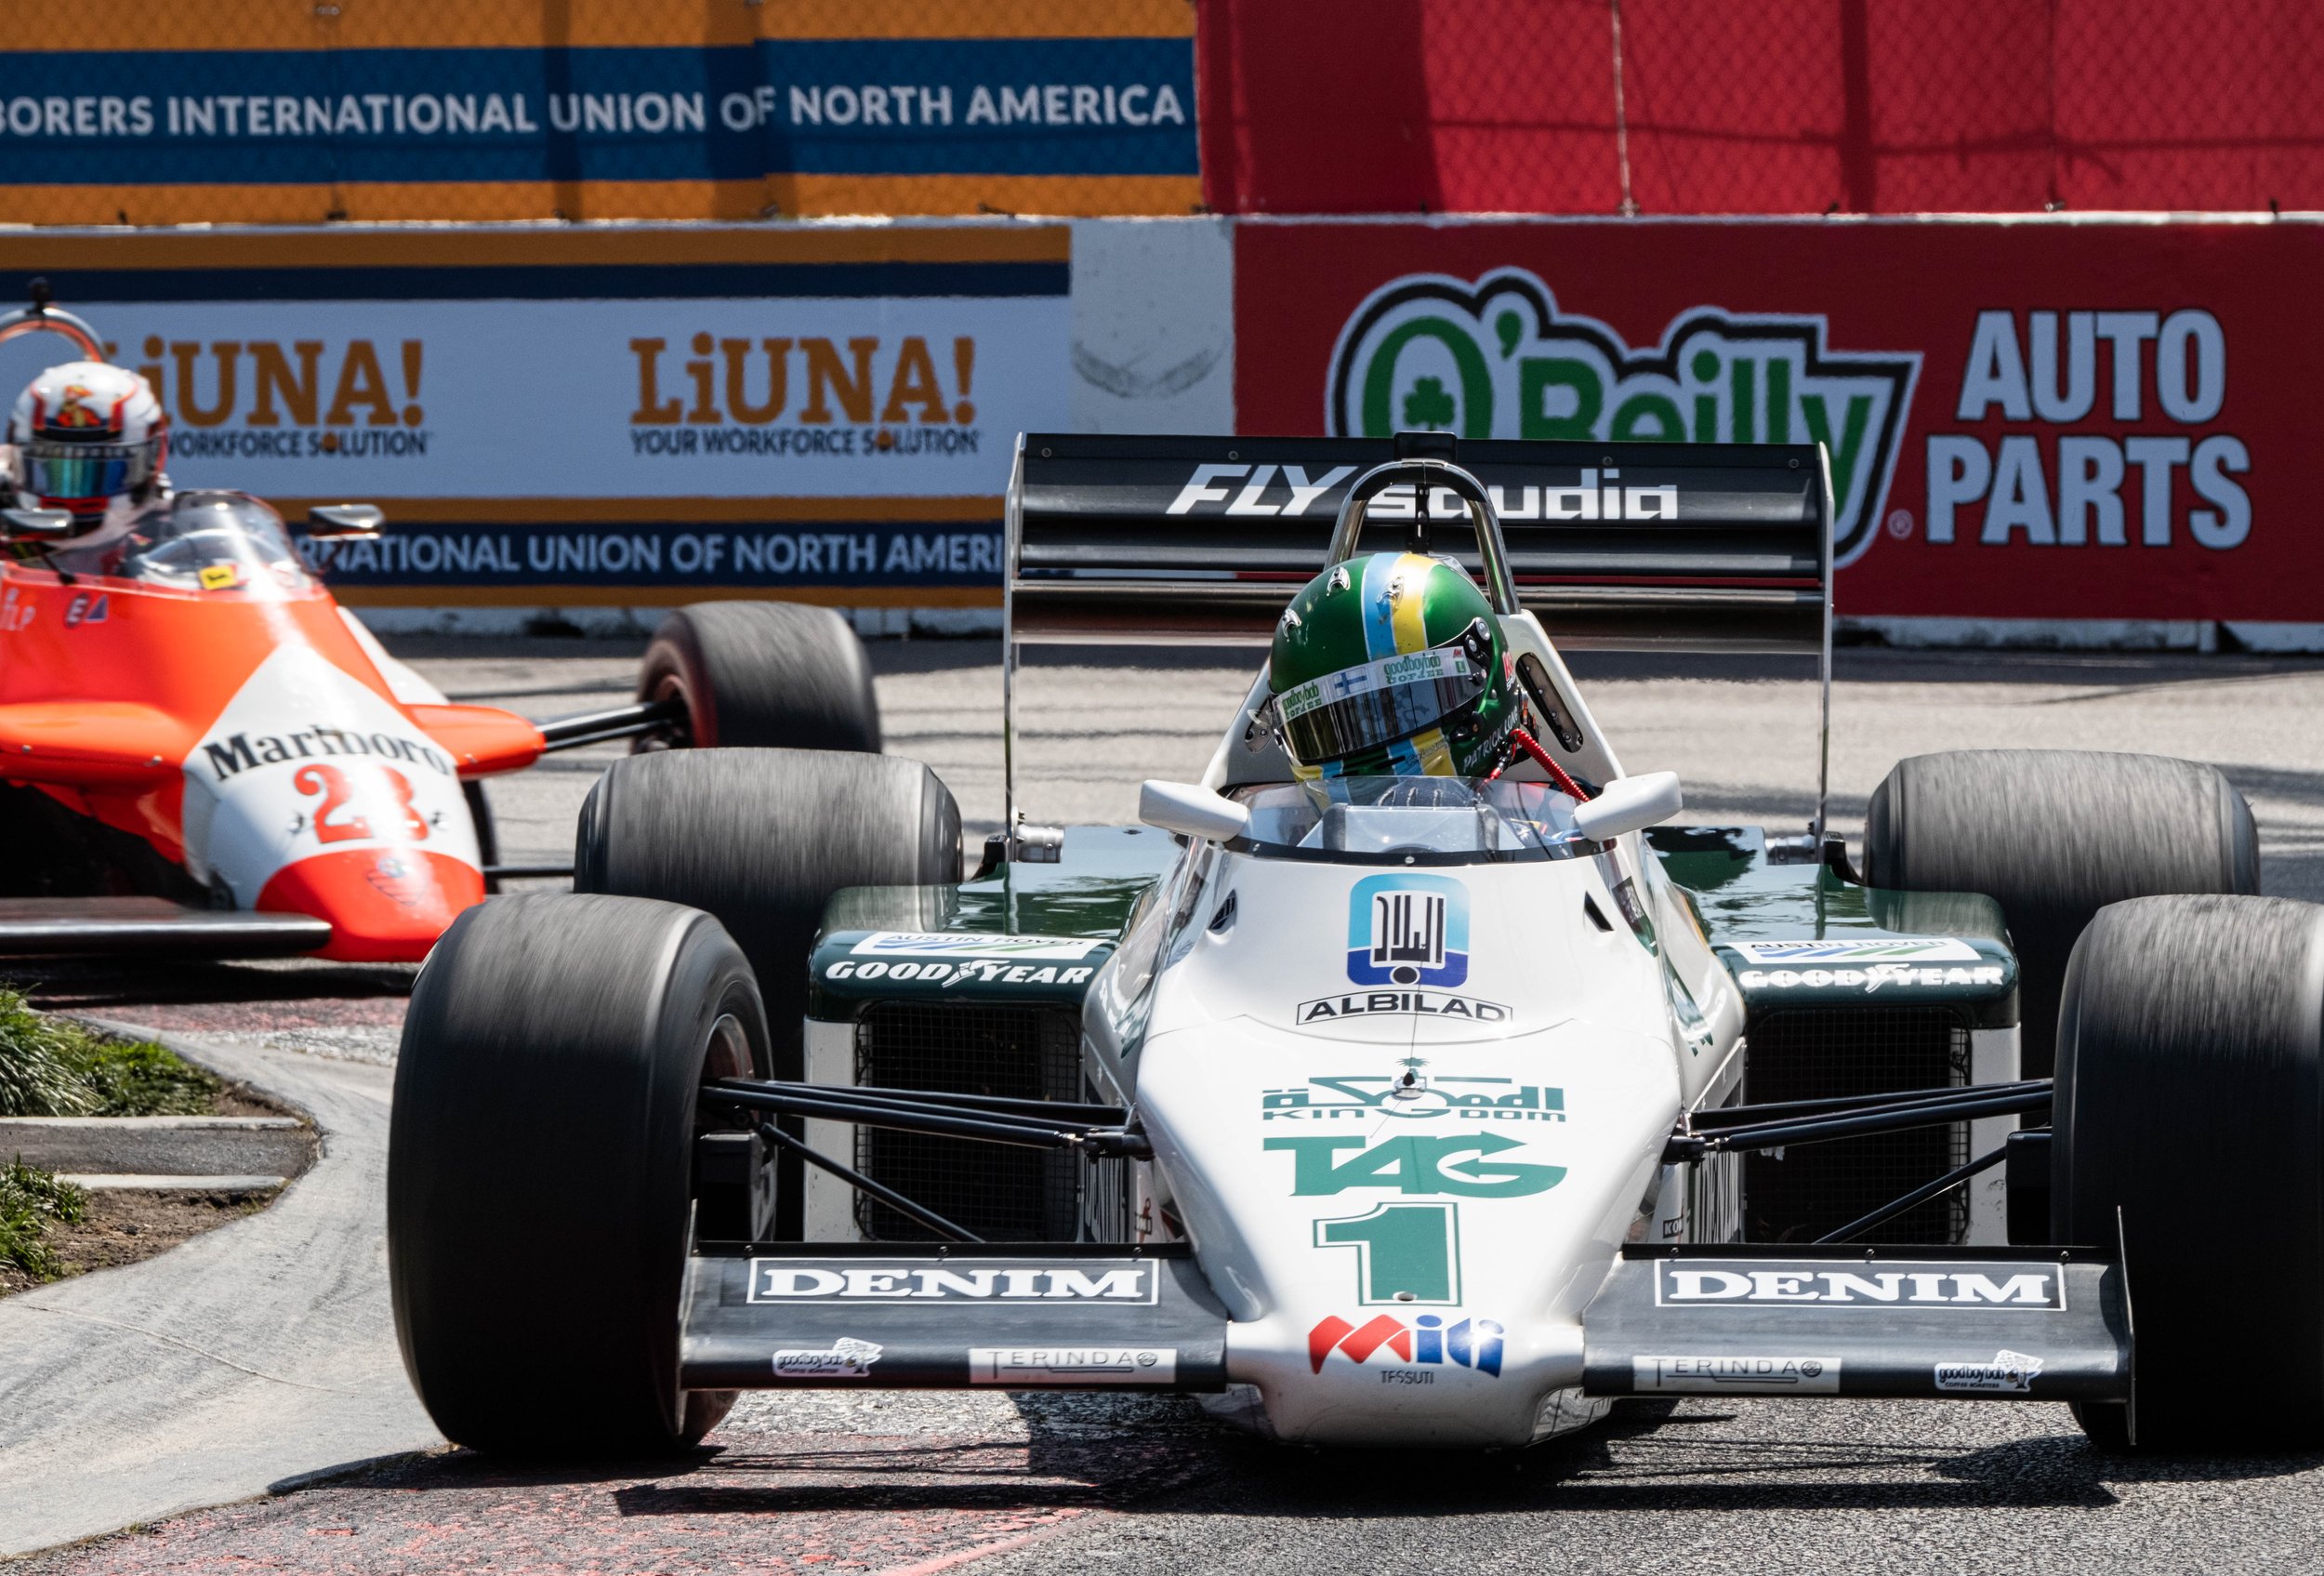  Patrick Long in the Historic F1 Challenge making the second turn of the track in Acura's 48th Grand Prix on Saturday, April 15 at Long Beach, Calif. (Danilo Perez | The Corsair) 